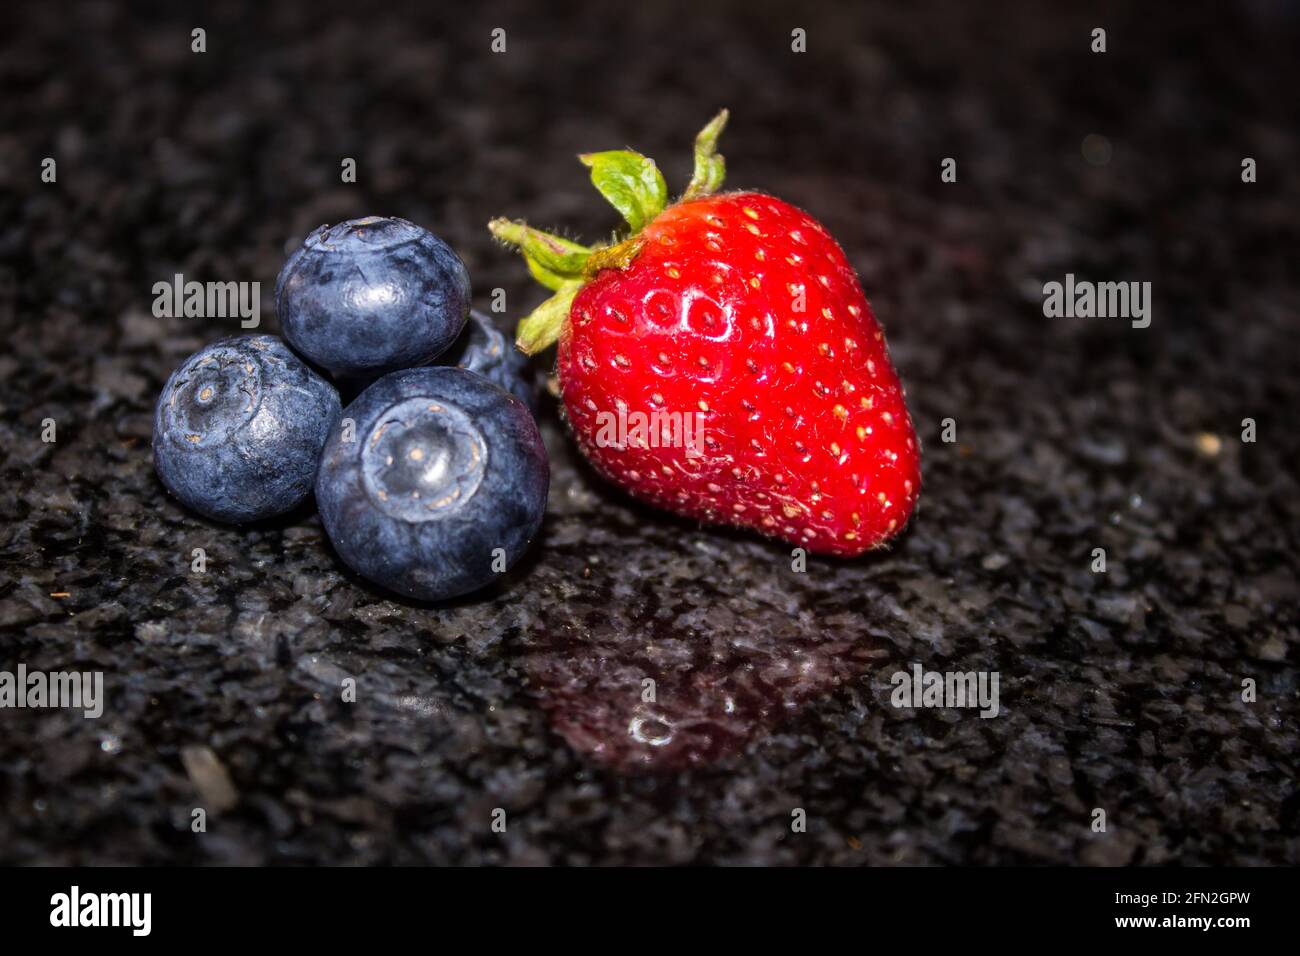 A single bright red strawberry and a small amount of indigo Blueberries on a dark kitchen countertop. Stock Photo